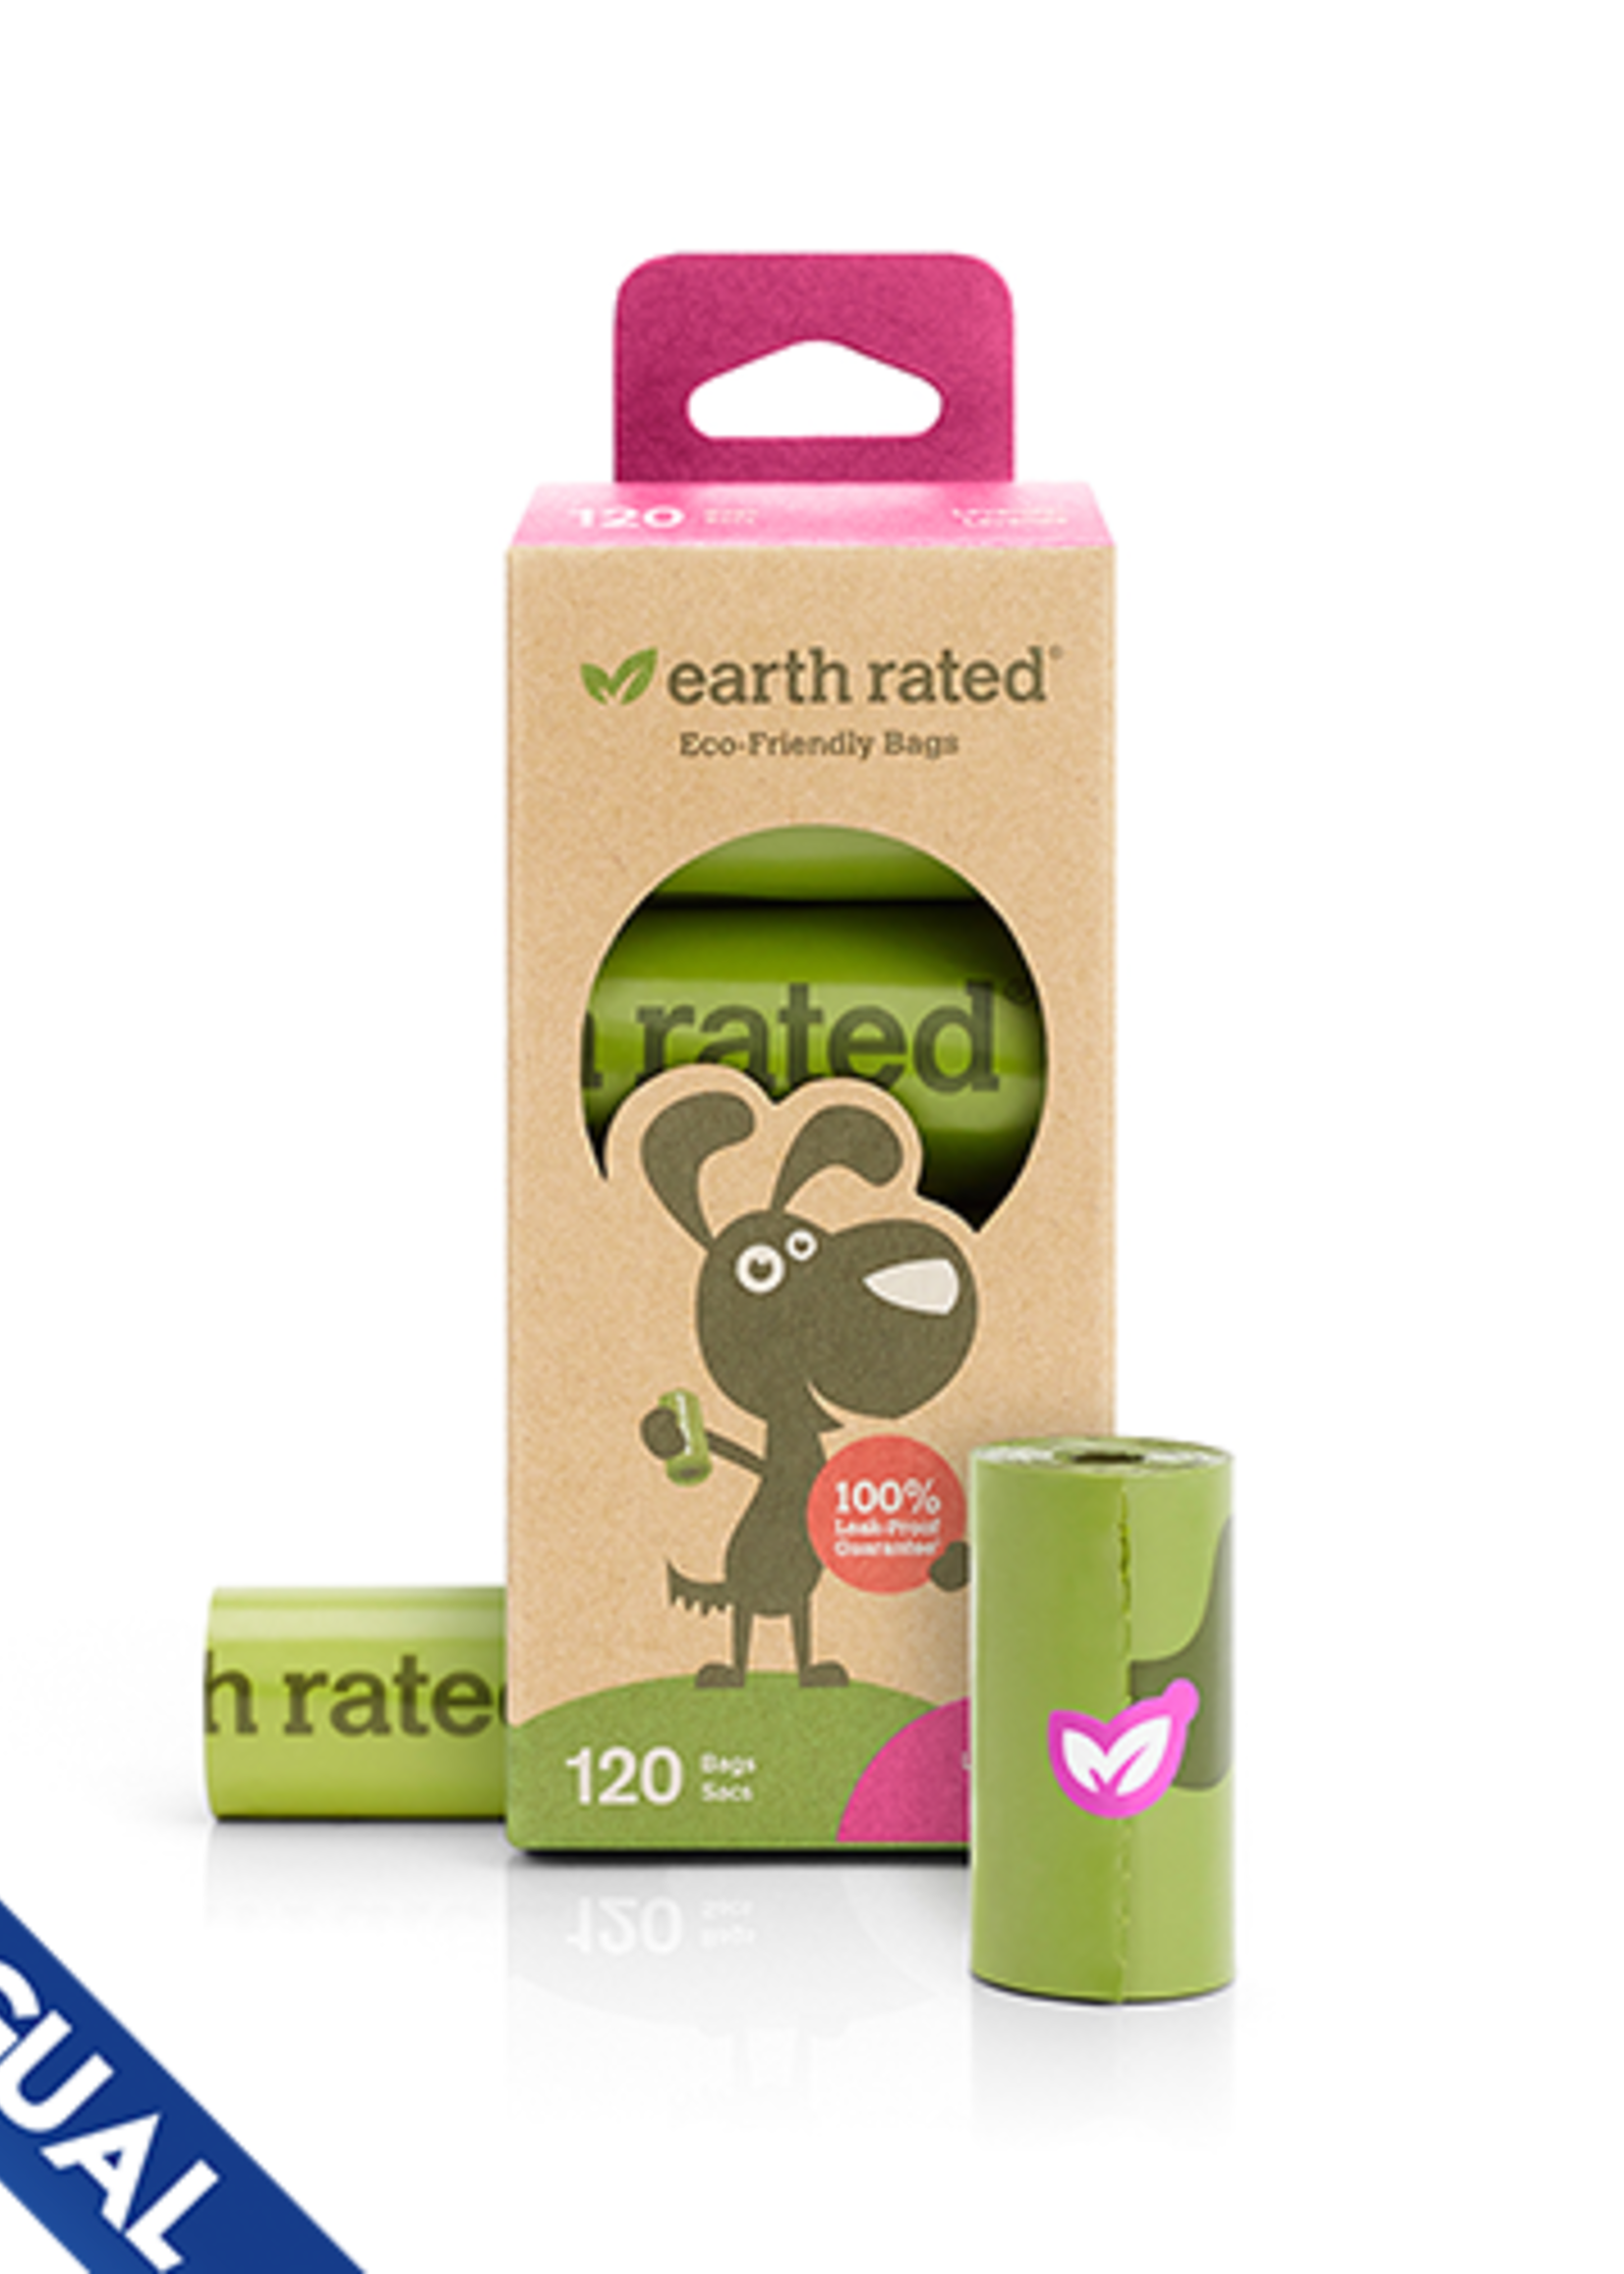 Earth Rated Earth Rated Lavender 8 Rolls (120 bags)